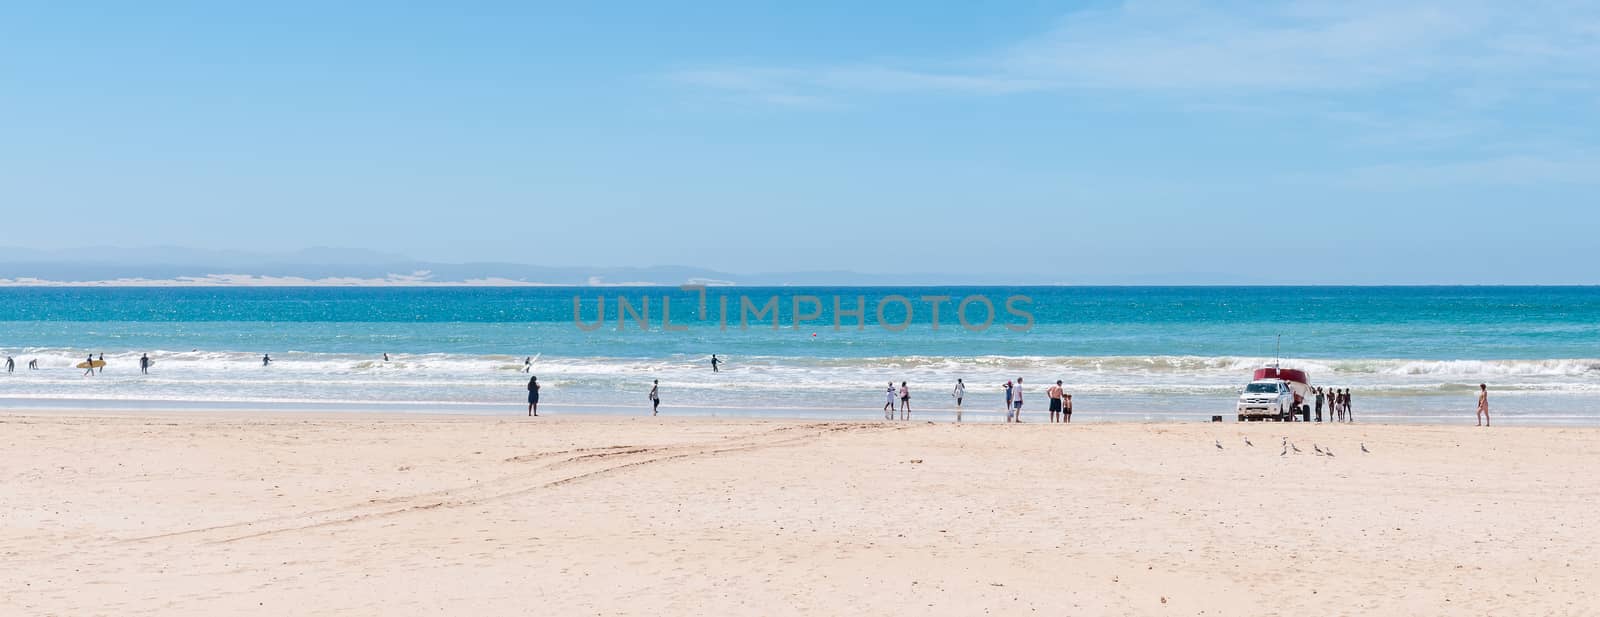 JEFFREYS BAY, SOUTH AFRICA - FEBRUARY 28, 2016:  A beach scene with a fishing boat being recovered. Unidentified people are looking on